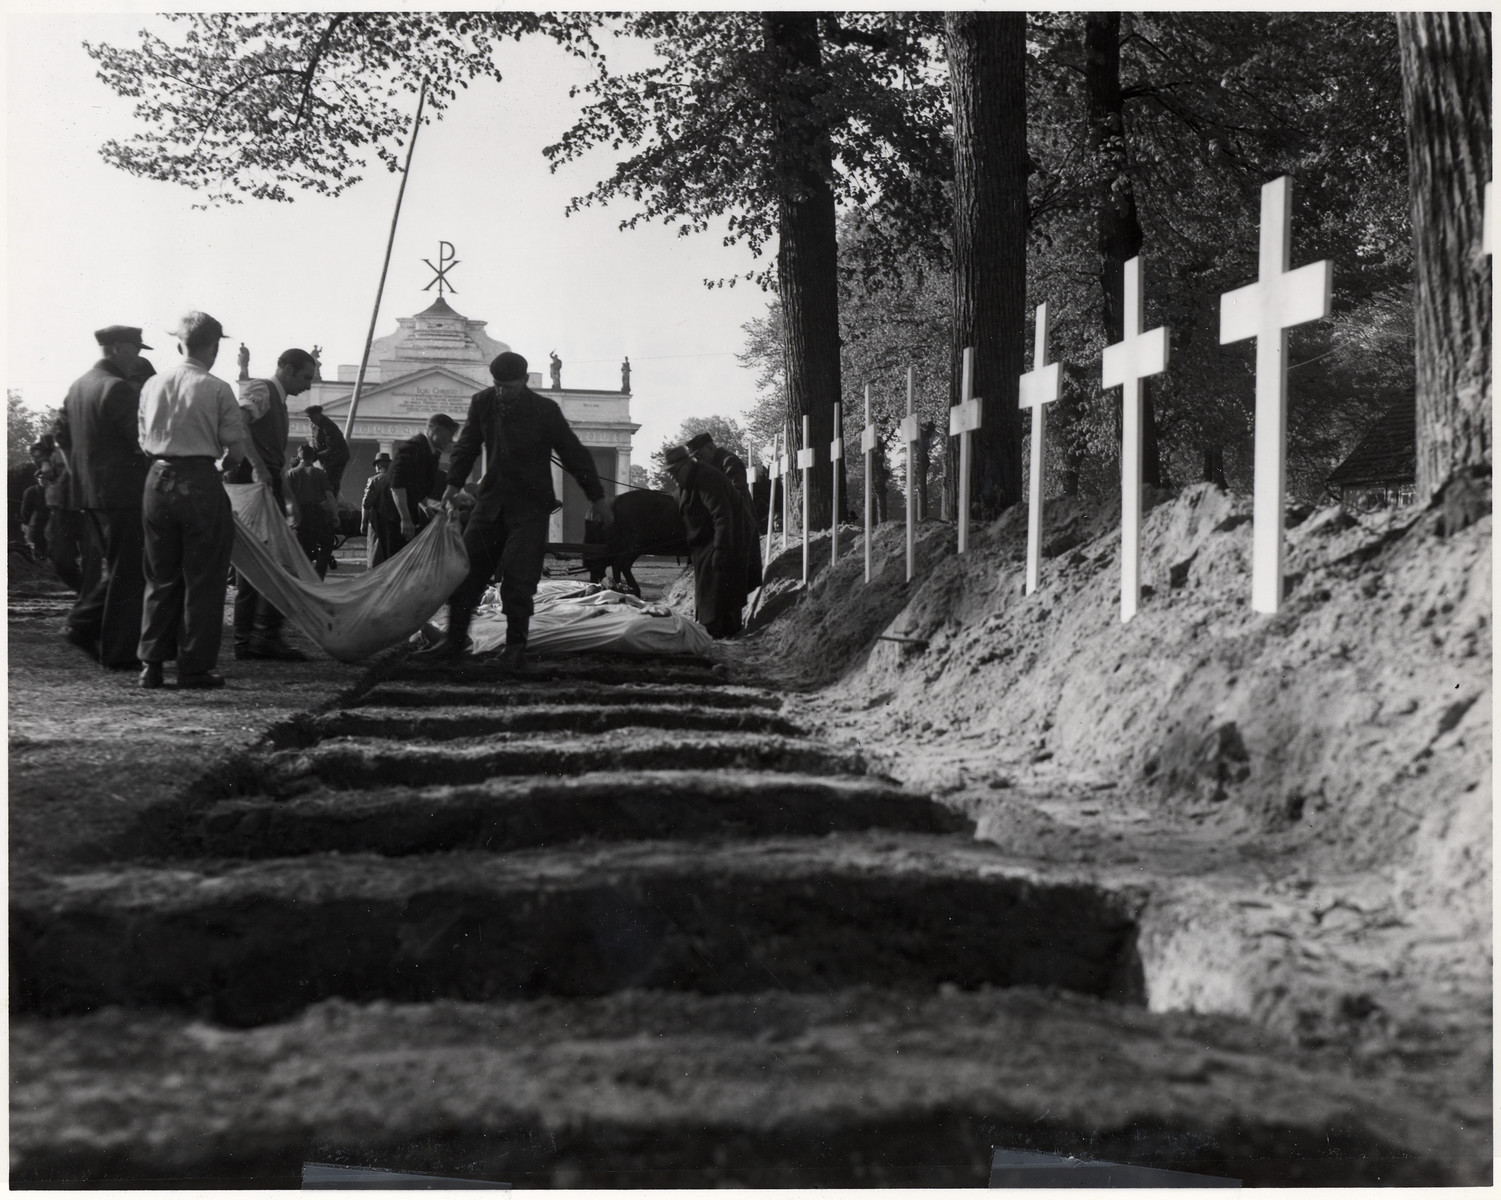 American soldiers force German civilians to participate in the burial of prisoners who died in the Woebbelin concentration camp.